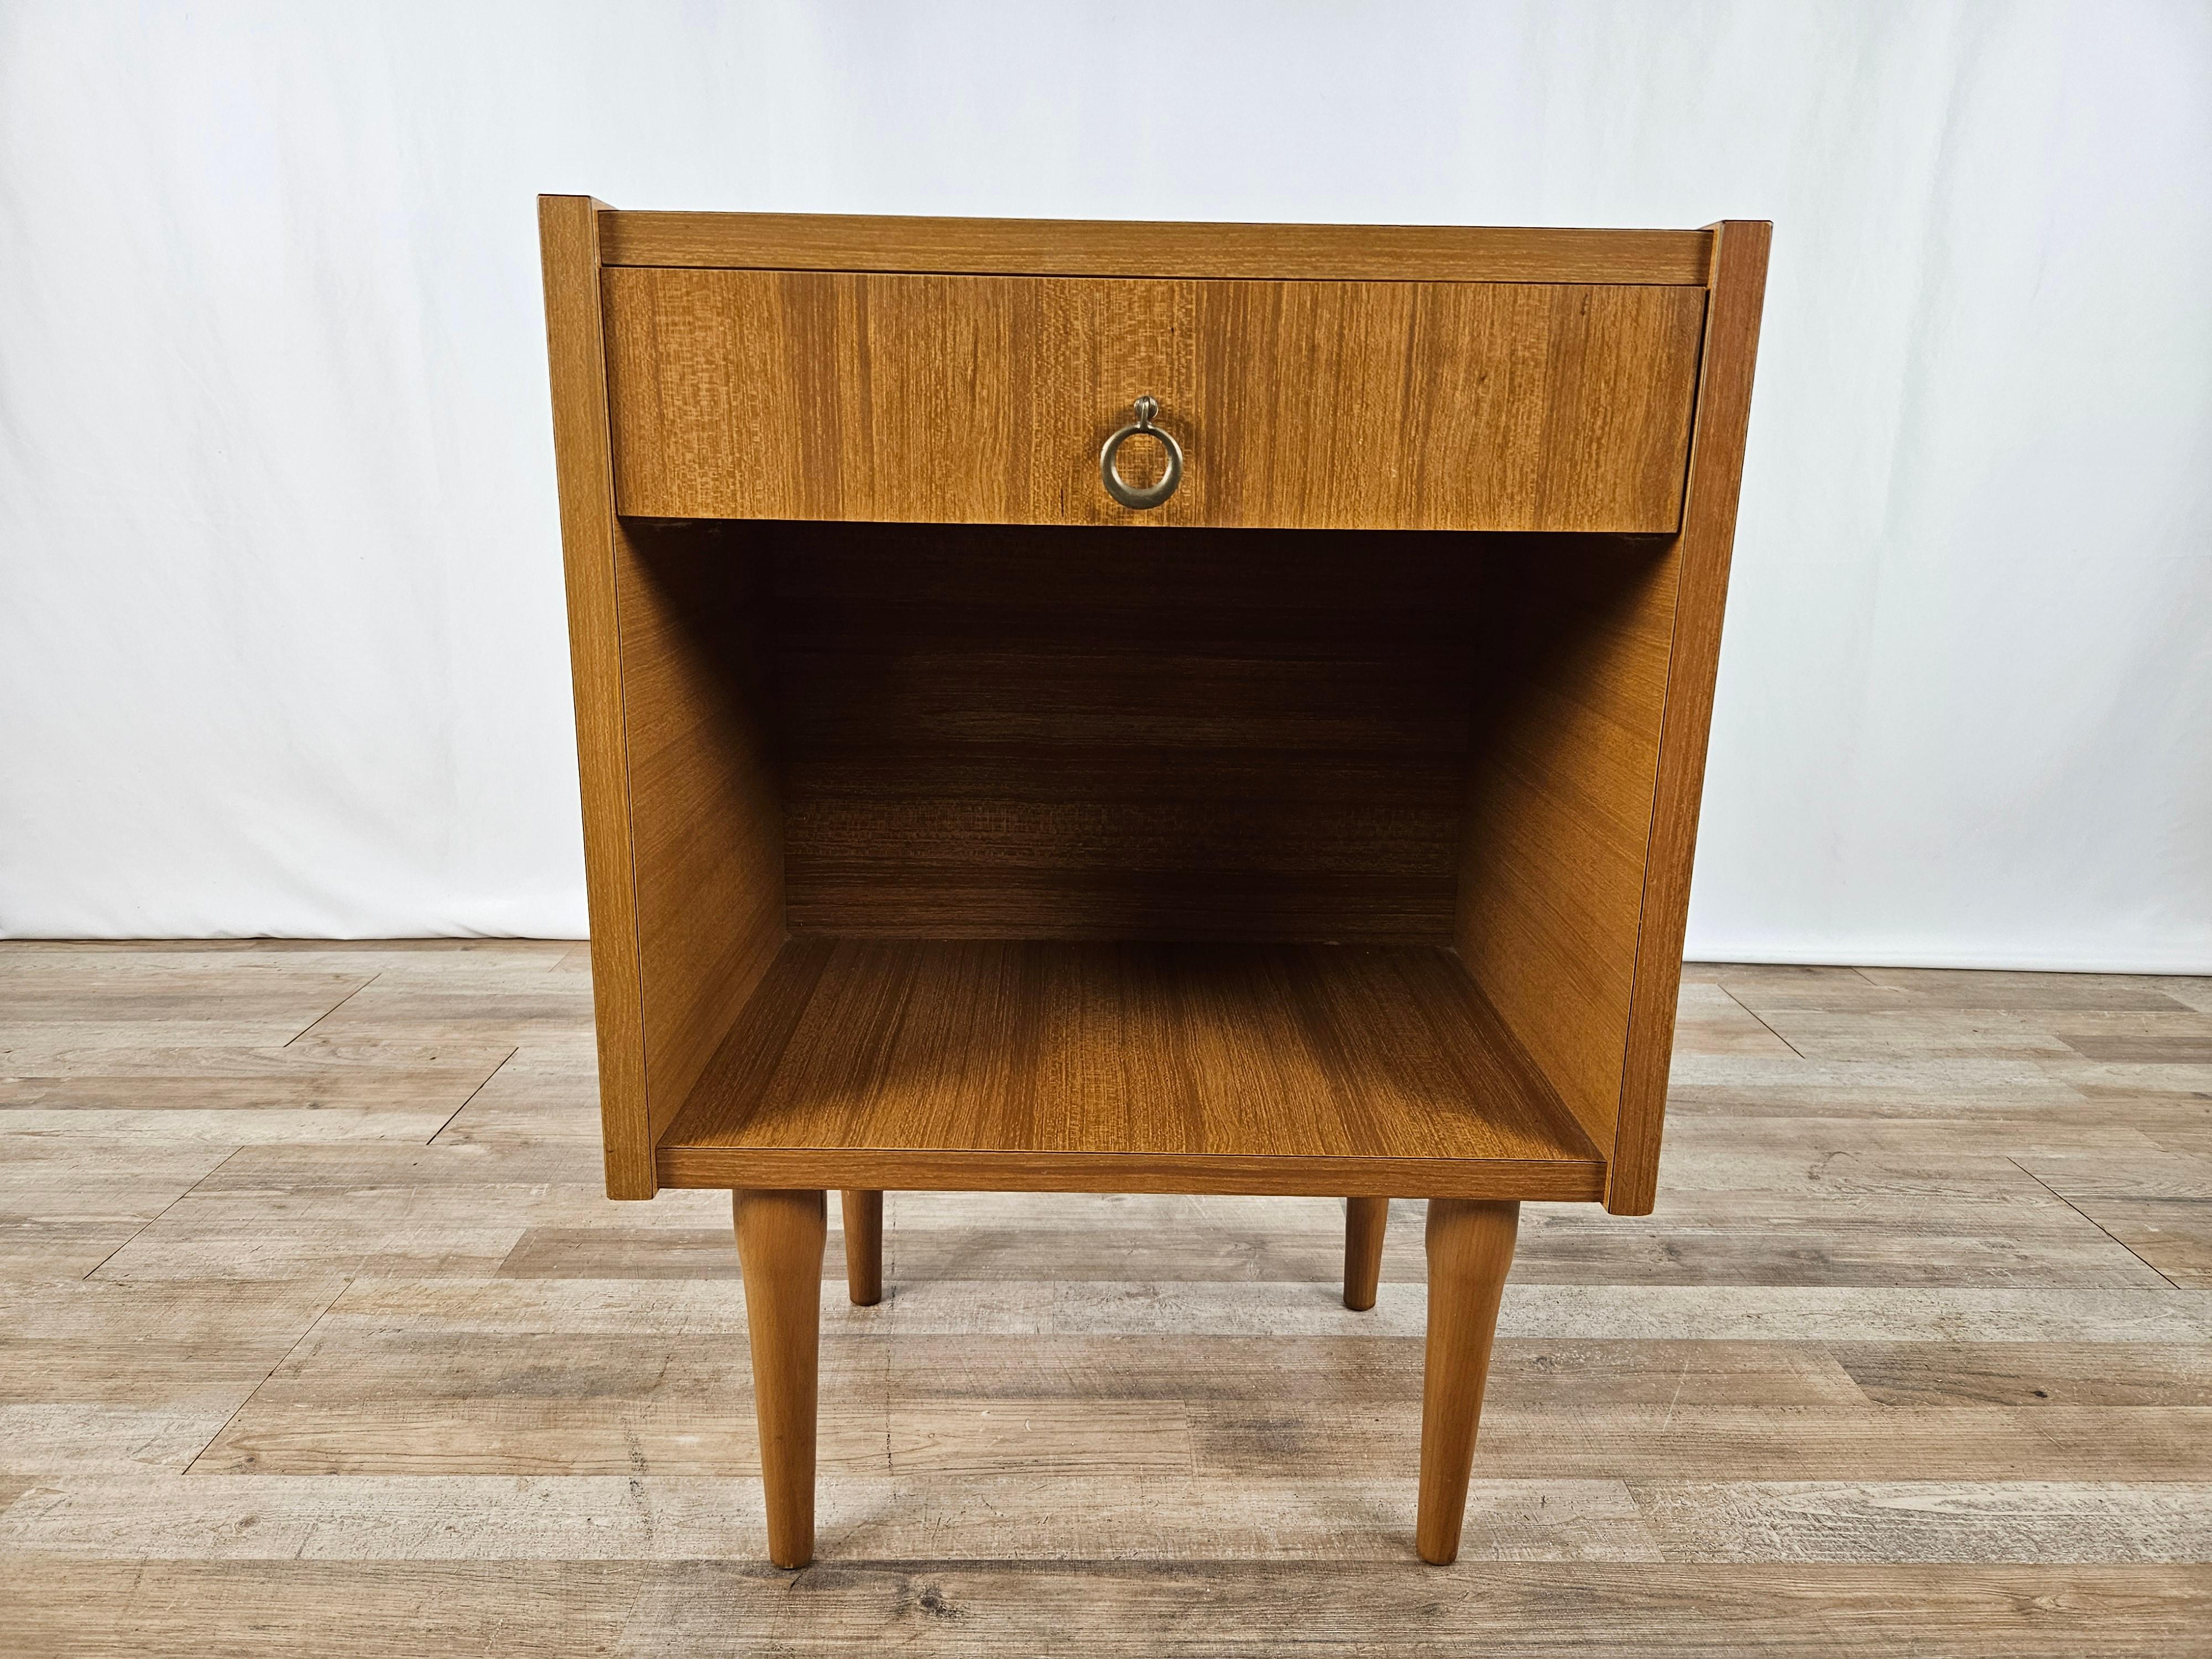 Italian-made 1980s single room nightstand with drawer and central open compartment.